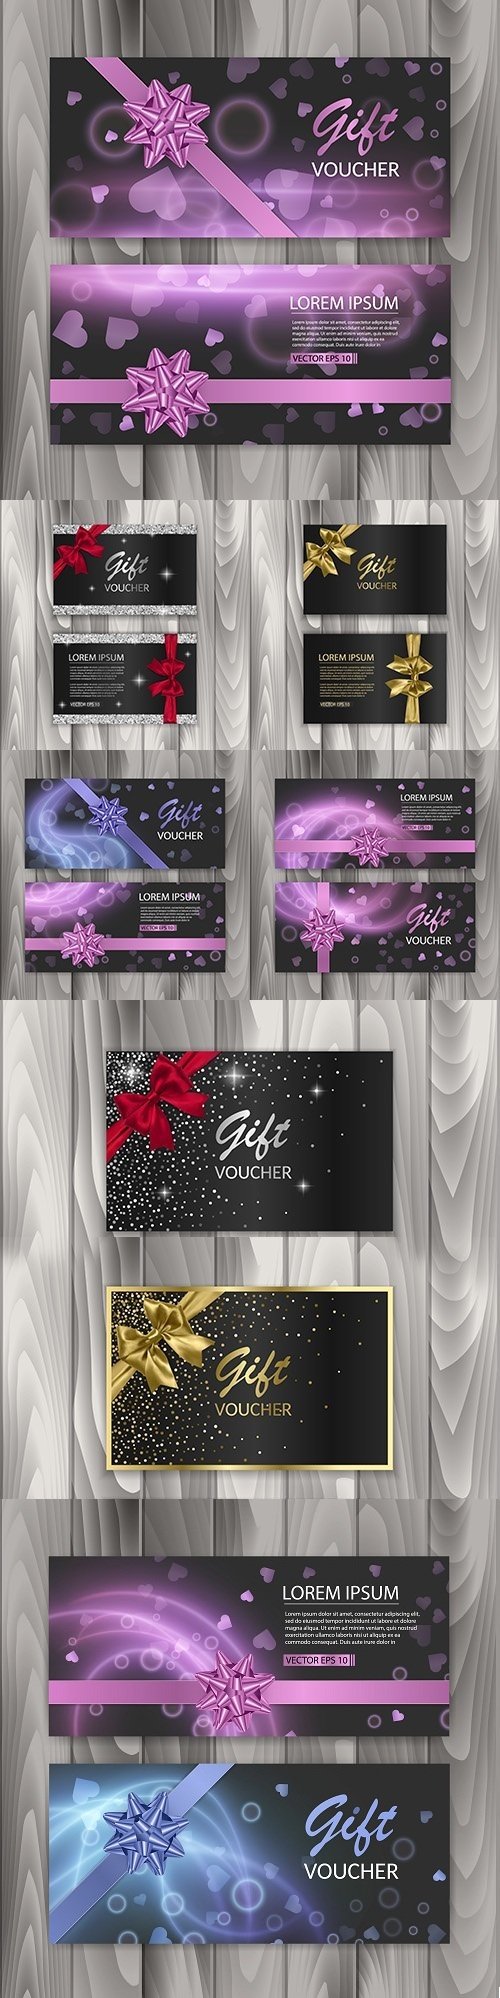 Voucher gift certificate and banners with abstract design